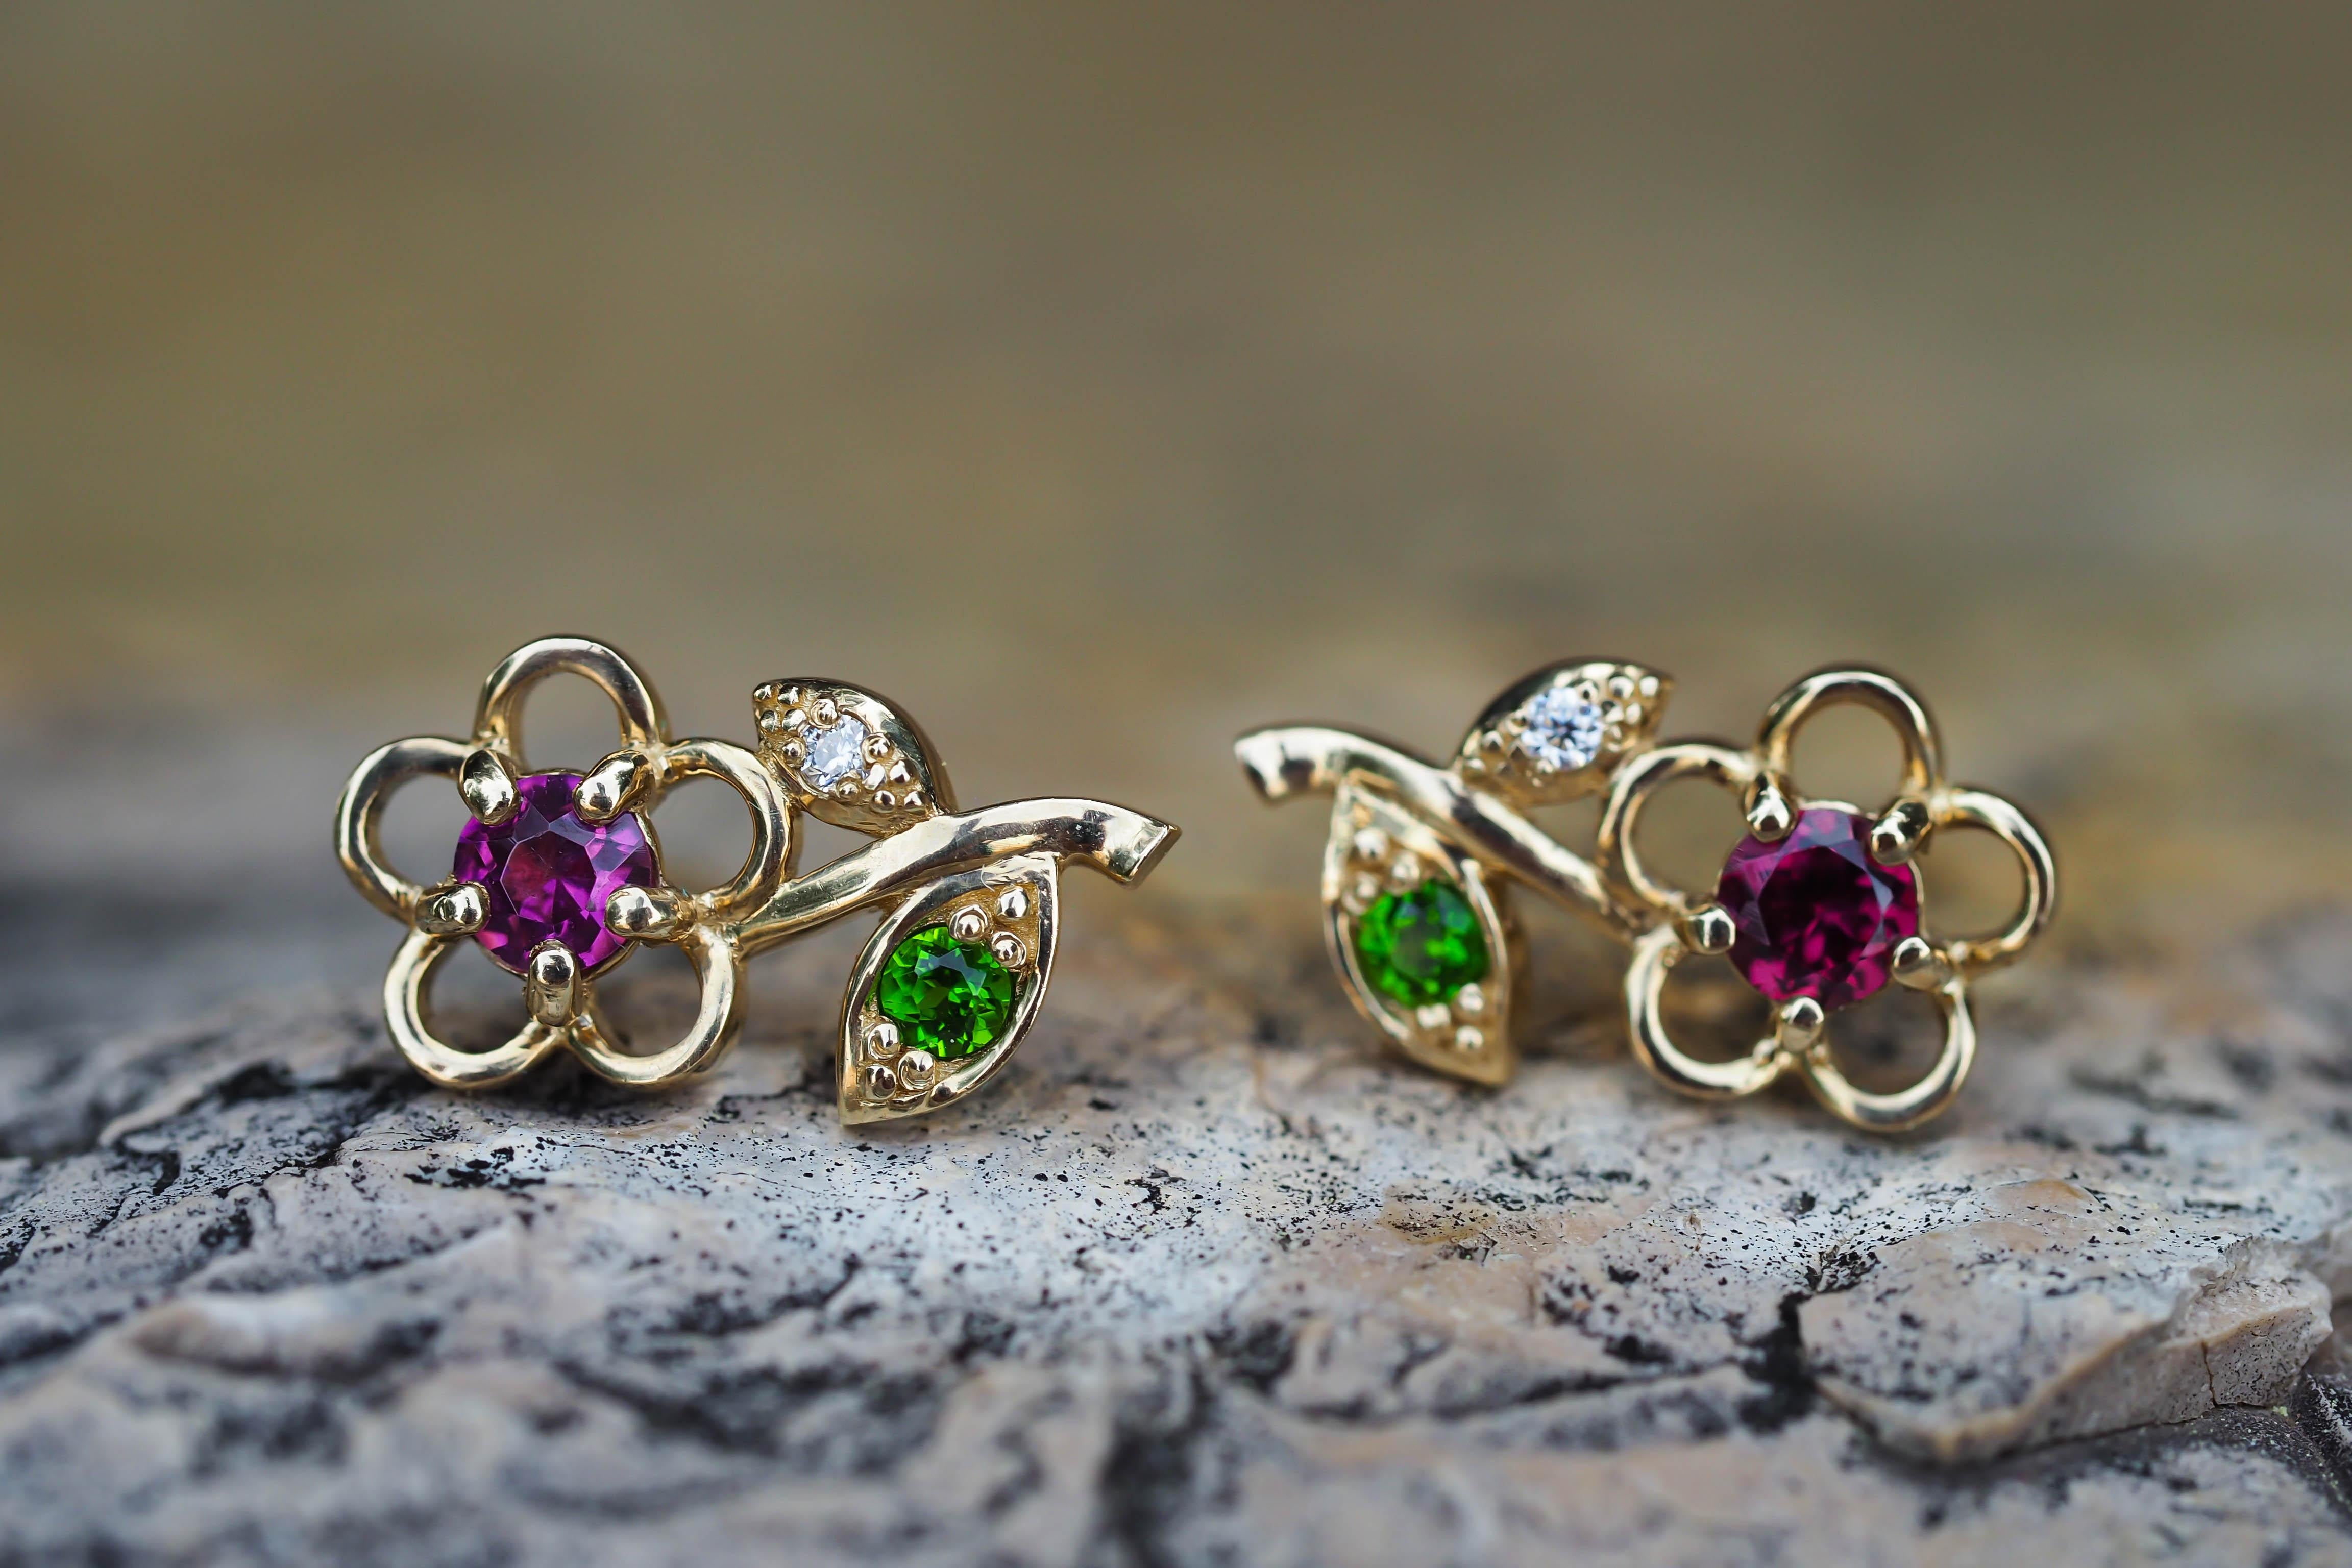 Flower stud earrings in 14k solid gold. 
Genuine garnet and tsavorite studs. Gold Stud earrings for young girl. Tiny flower gold earrings.

Metal type: 14kt solid gold
Size: 13 x 6 mm.
Weight: 1.95 g.

Central stones:
Genuine garnets: red and purple